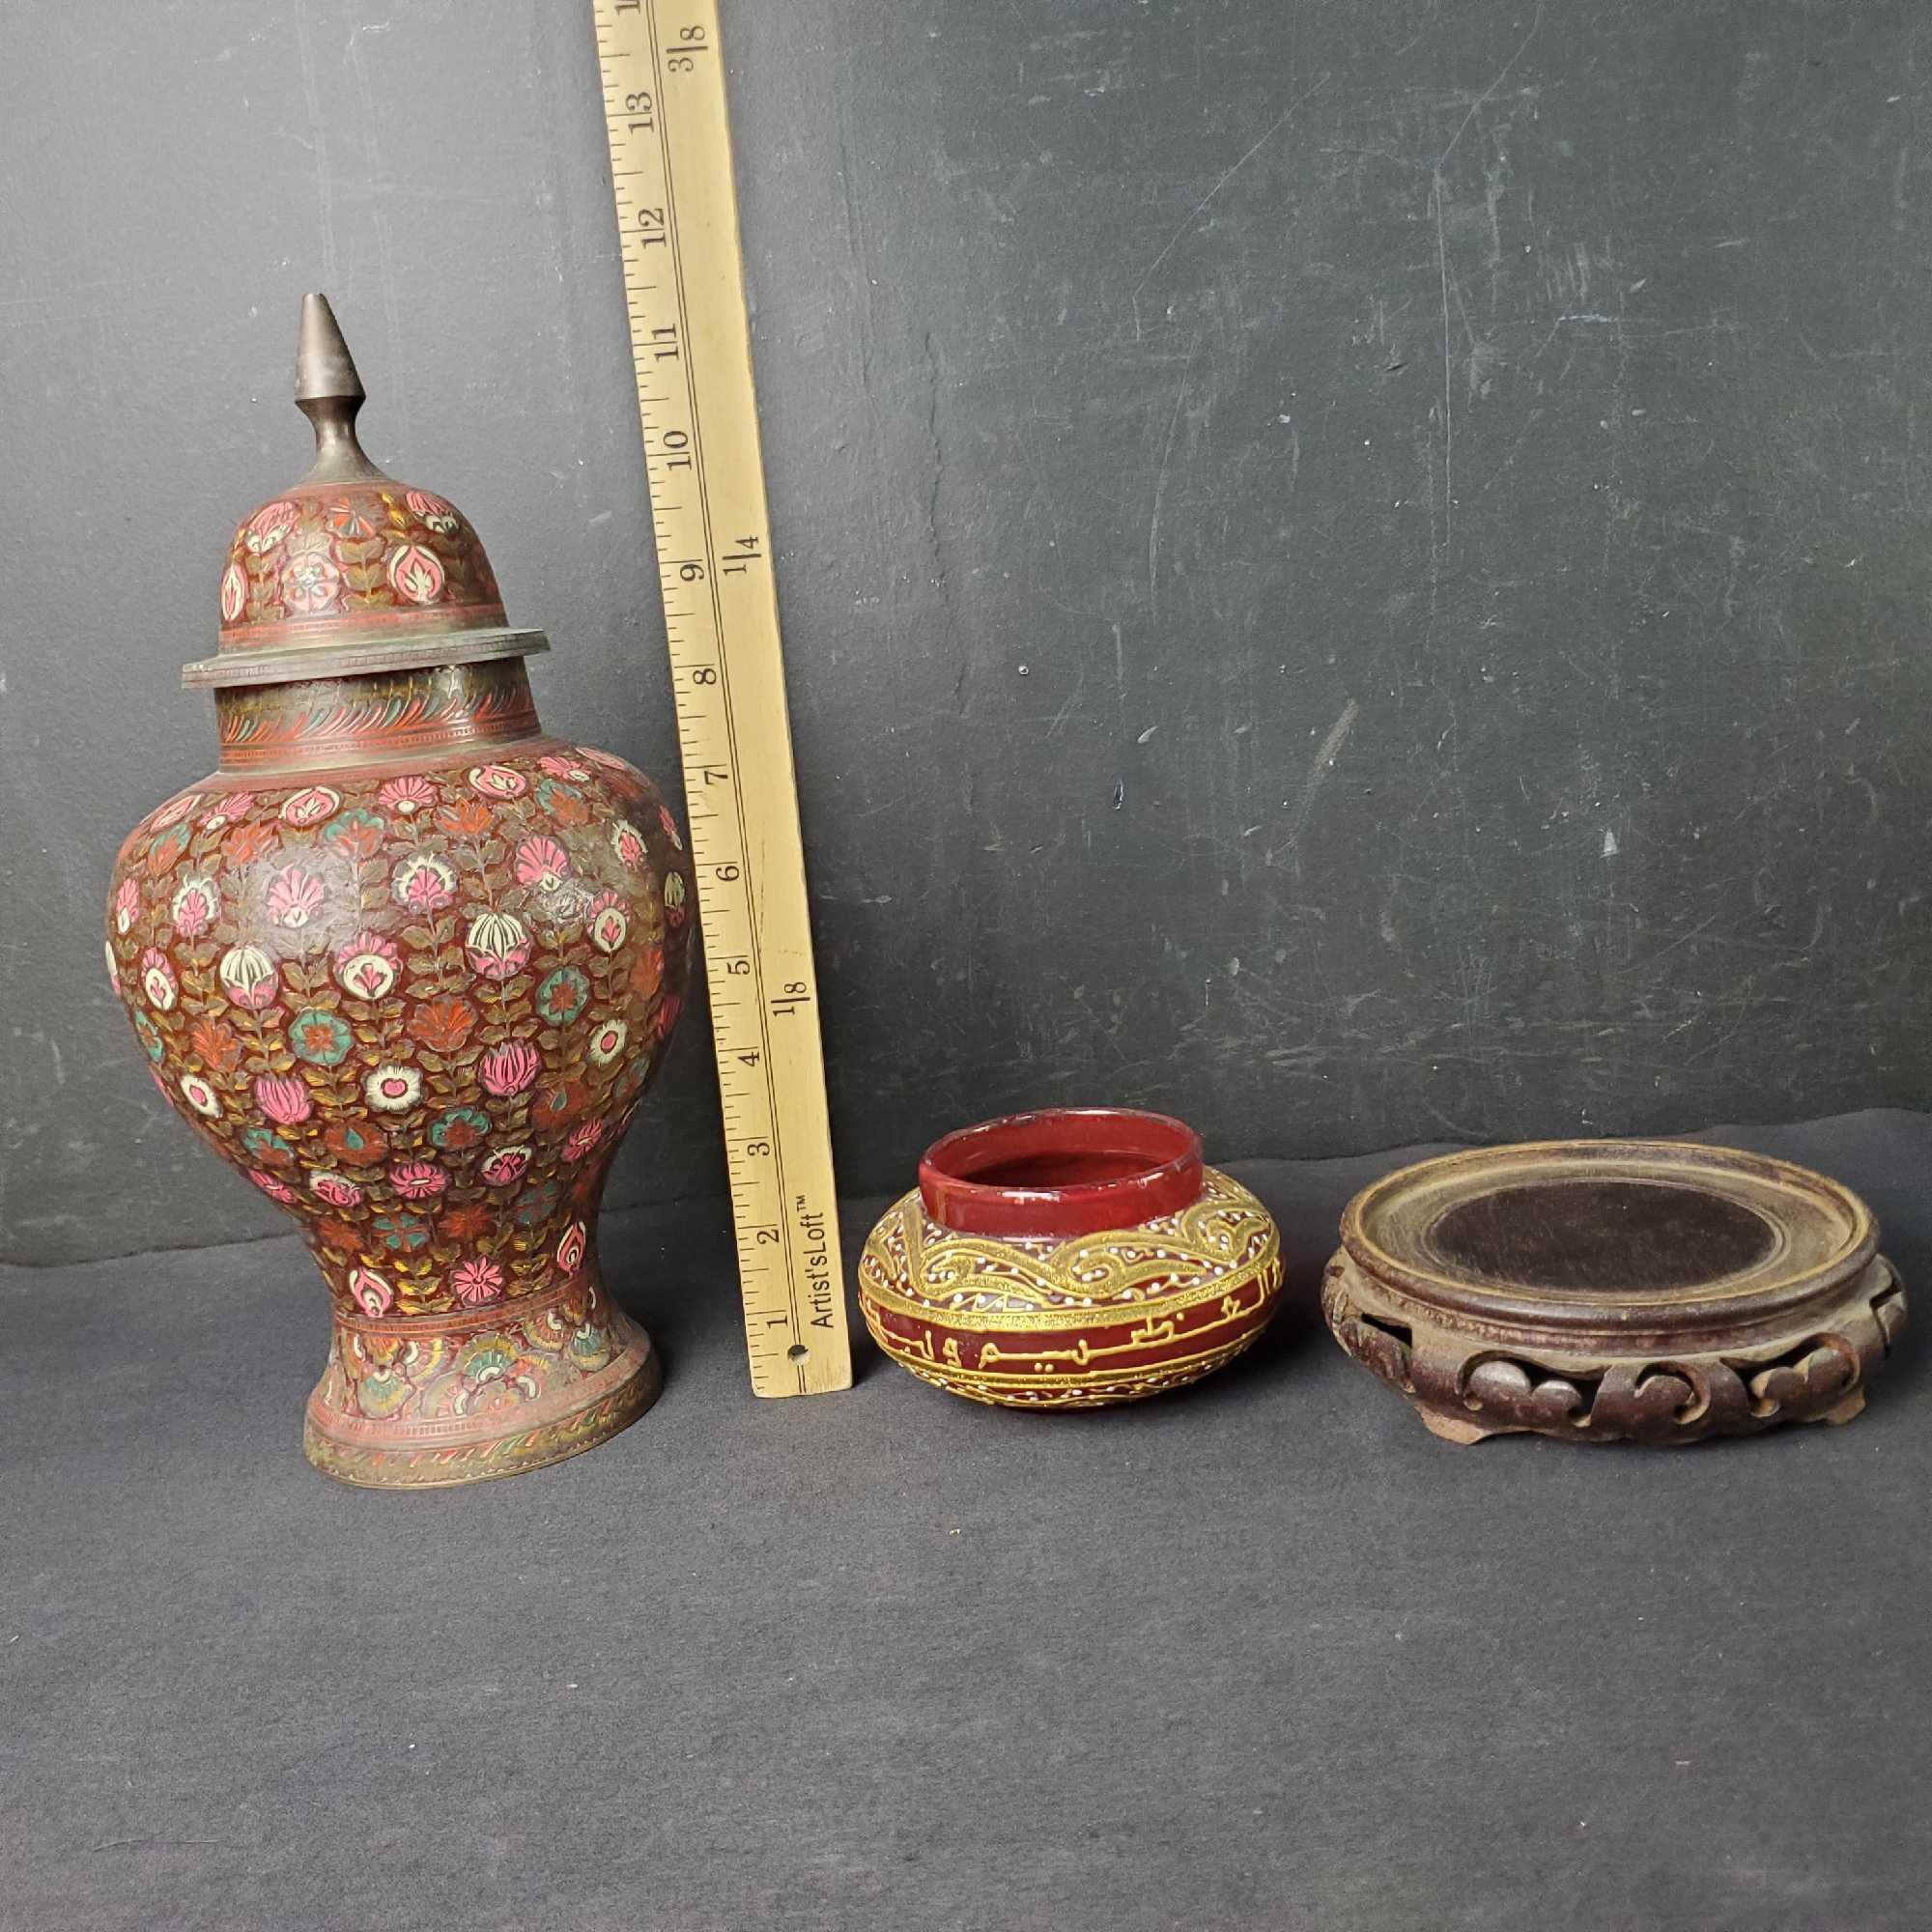 Misc. metal decorative urn unique shue horn carved marble floral design small red/gold